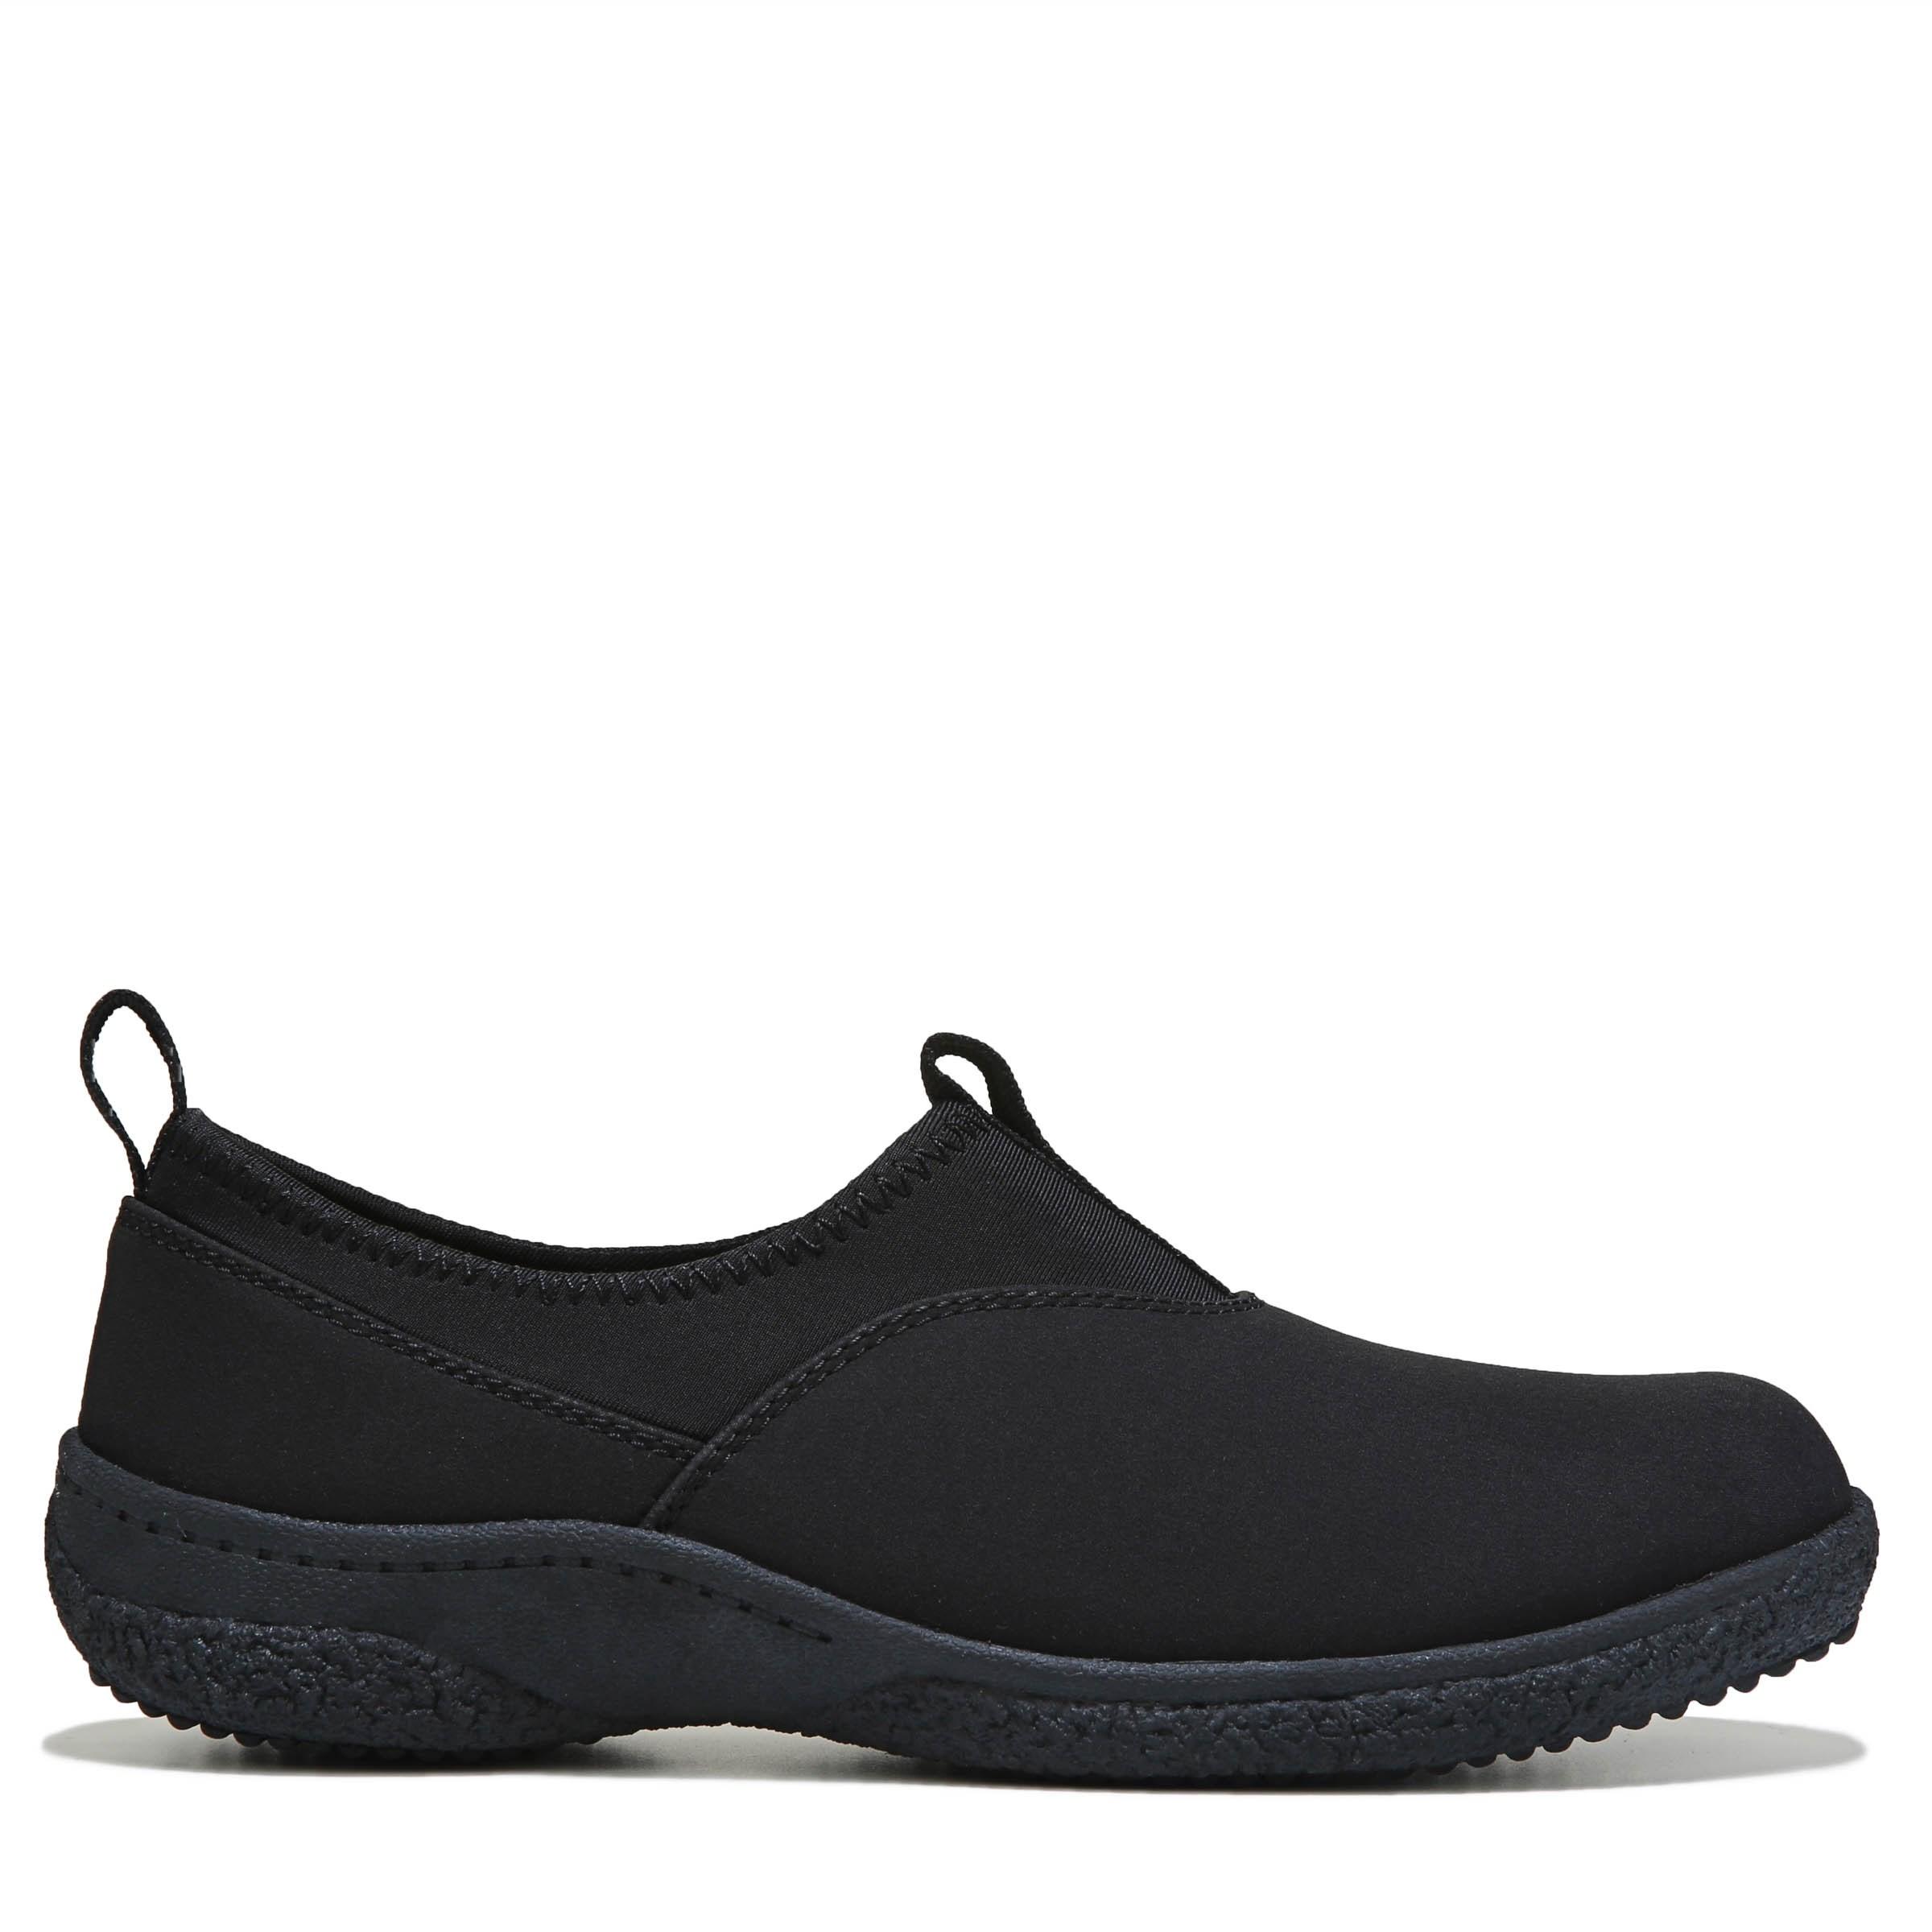 Propet Synthetic Madi Medium/wide/x-wide Slip On Shoes in Black - Lyst